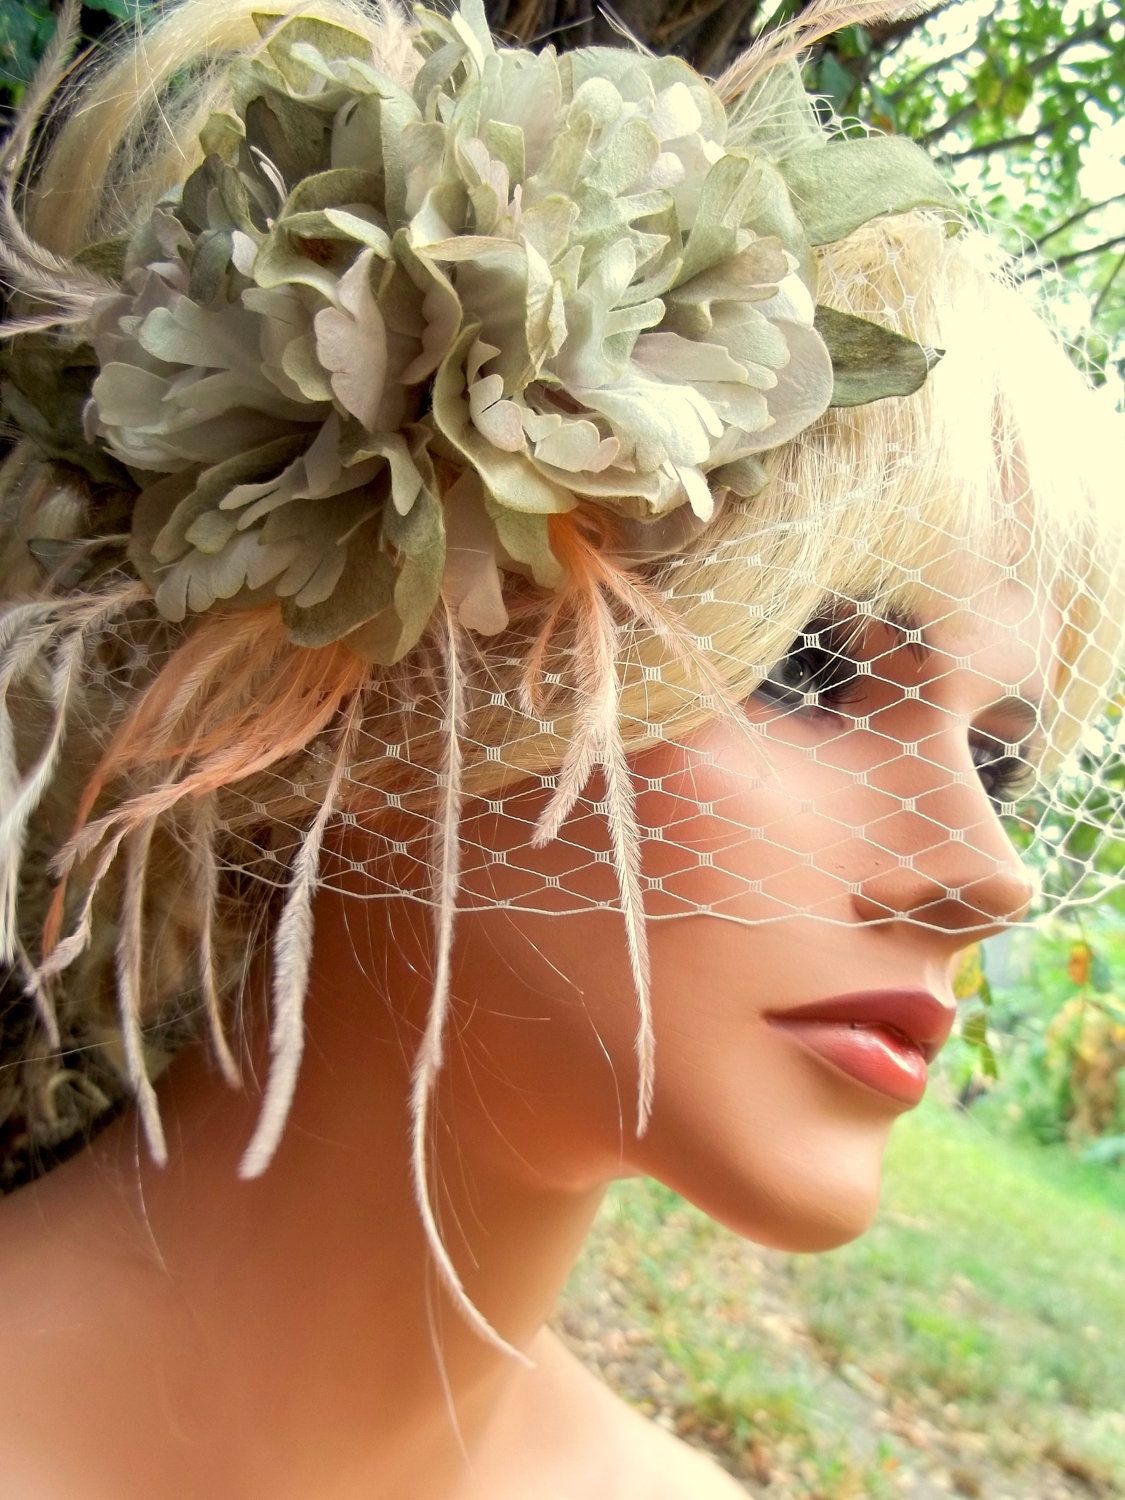 Build your own Fascinator – May 18th